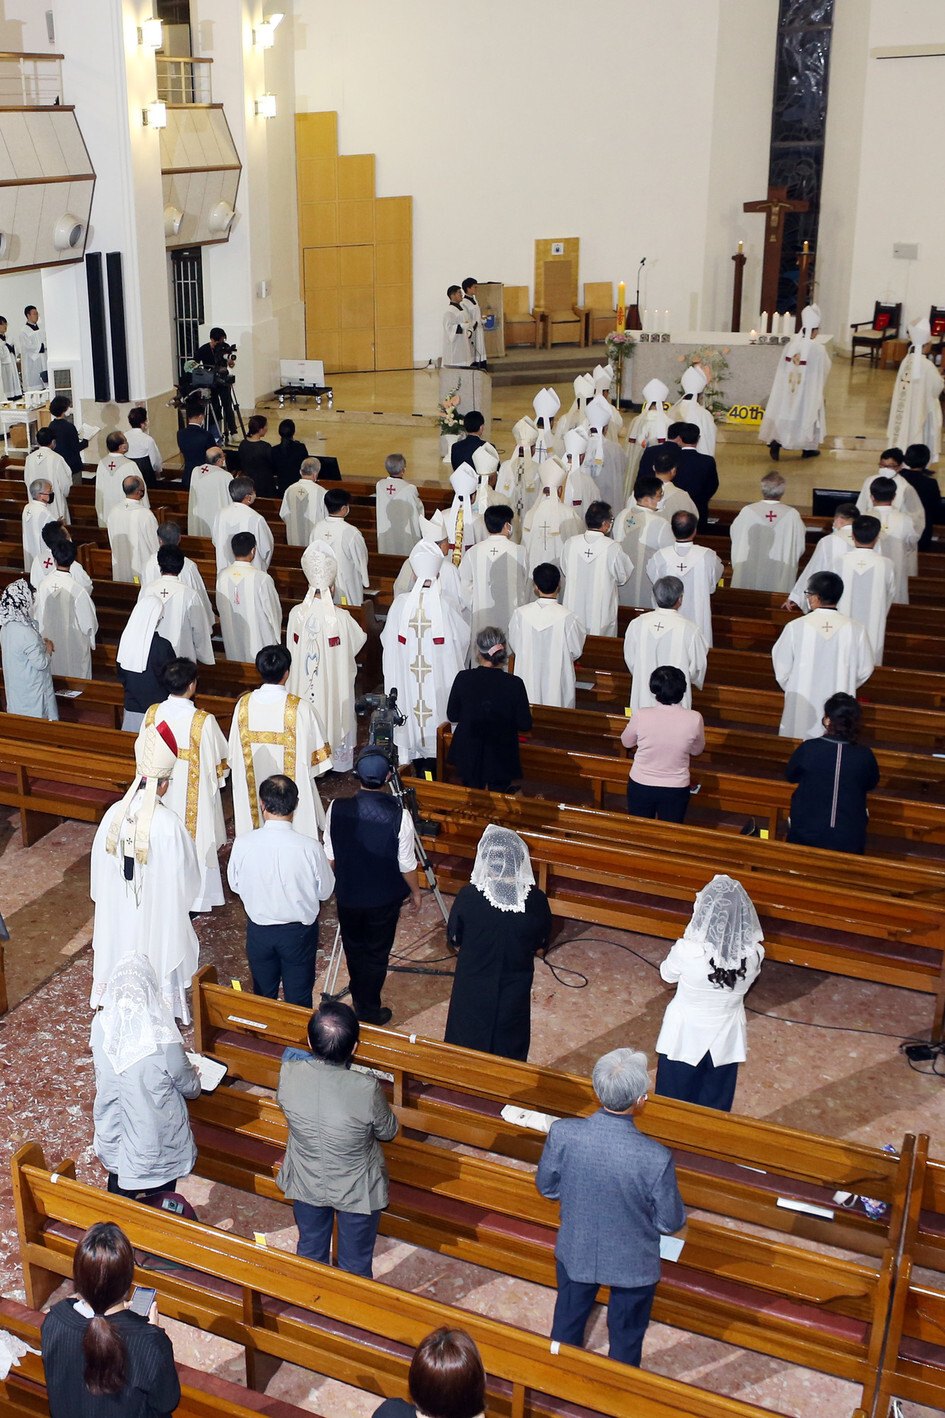 A commemorative mass for the 40th anniversary of the Gwangju Democratization Movement held at the Archdiocese cathedral in Gwangju’s Buk (North) District. (Yonhap News)